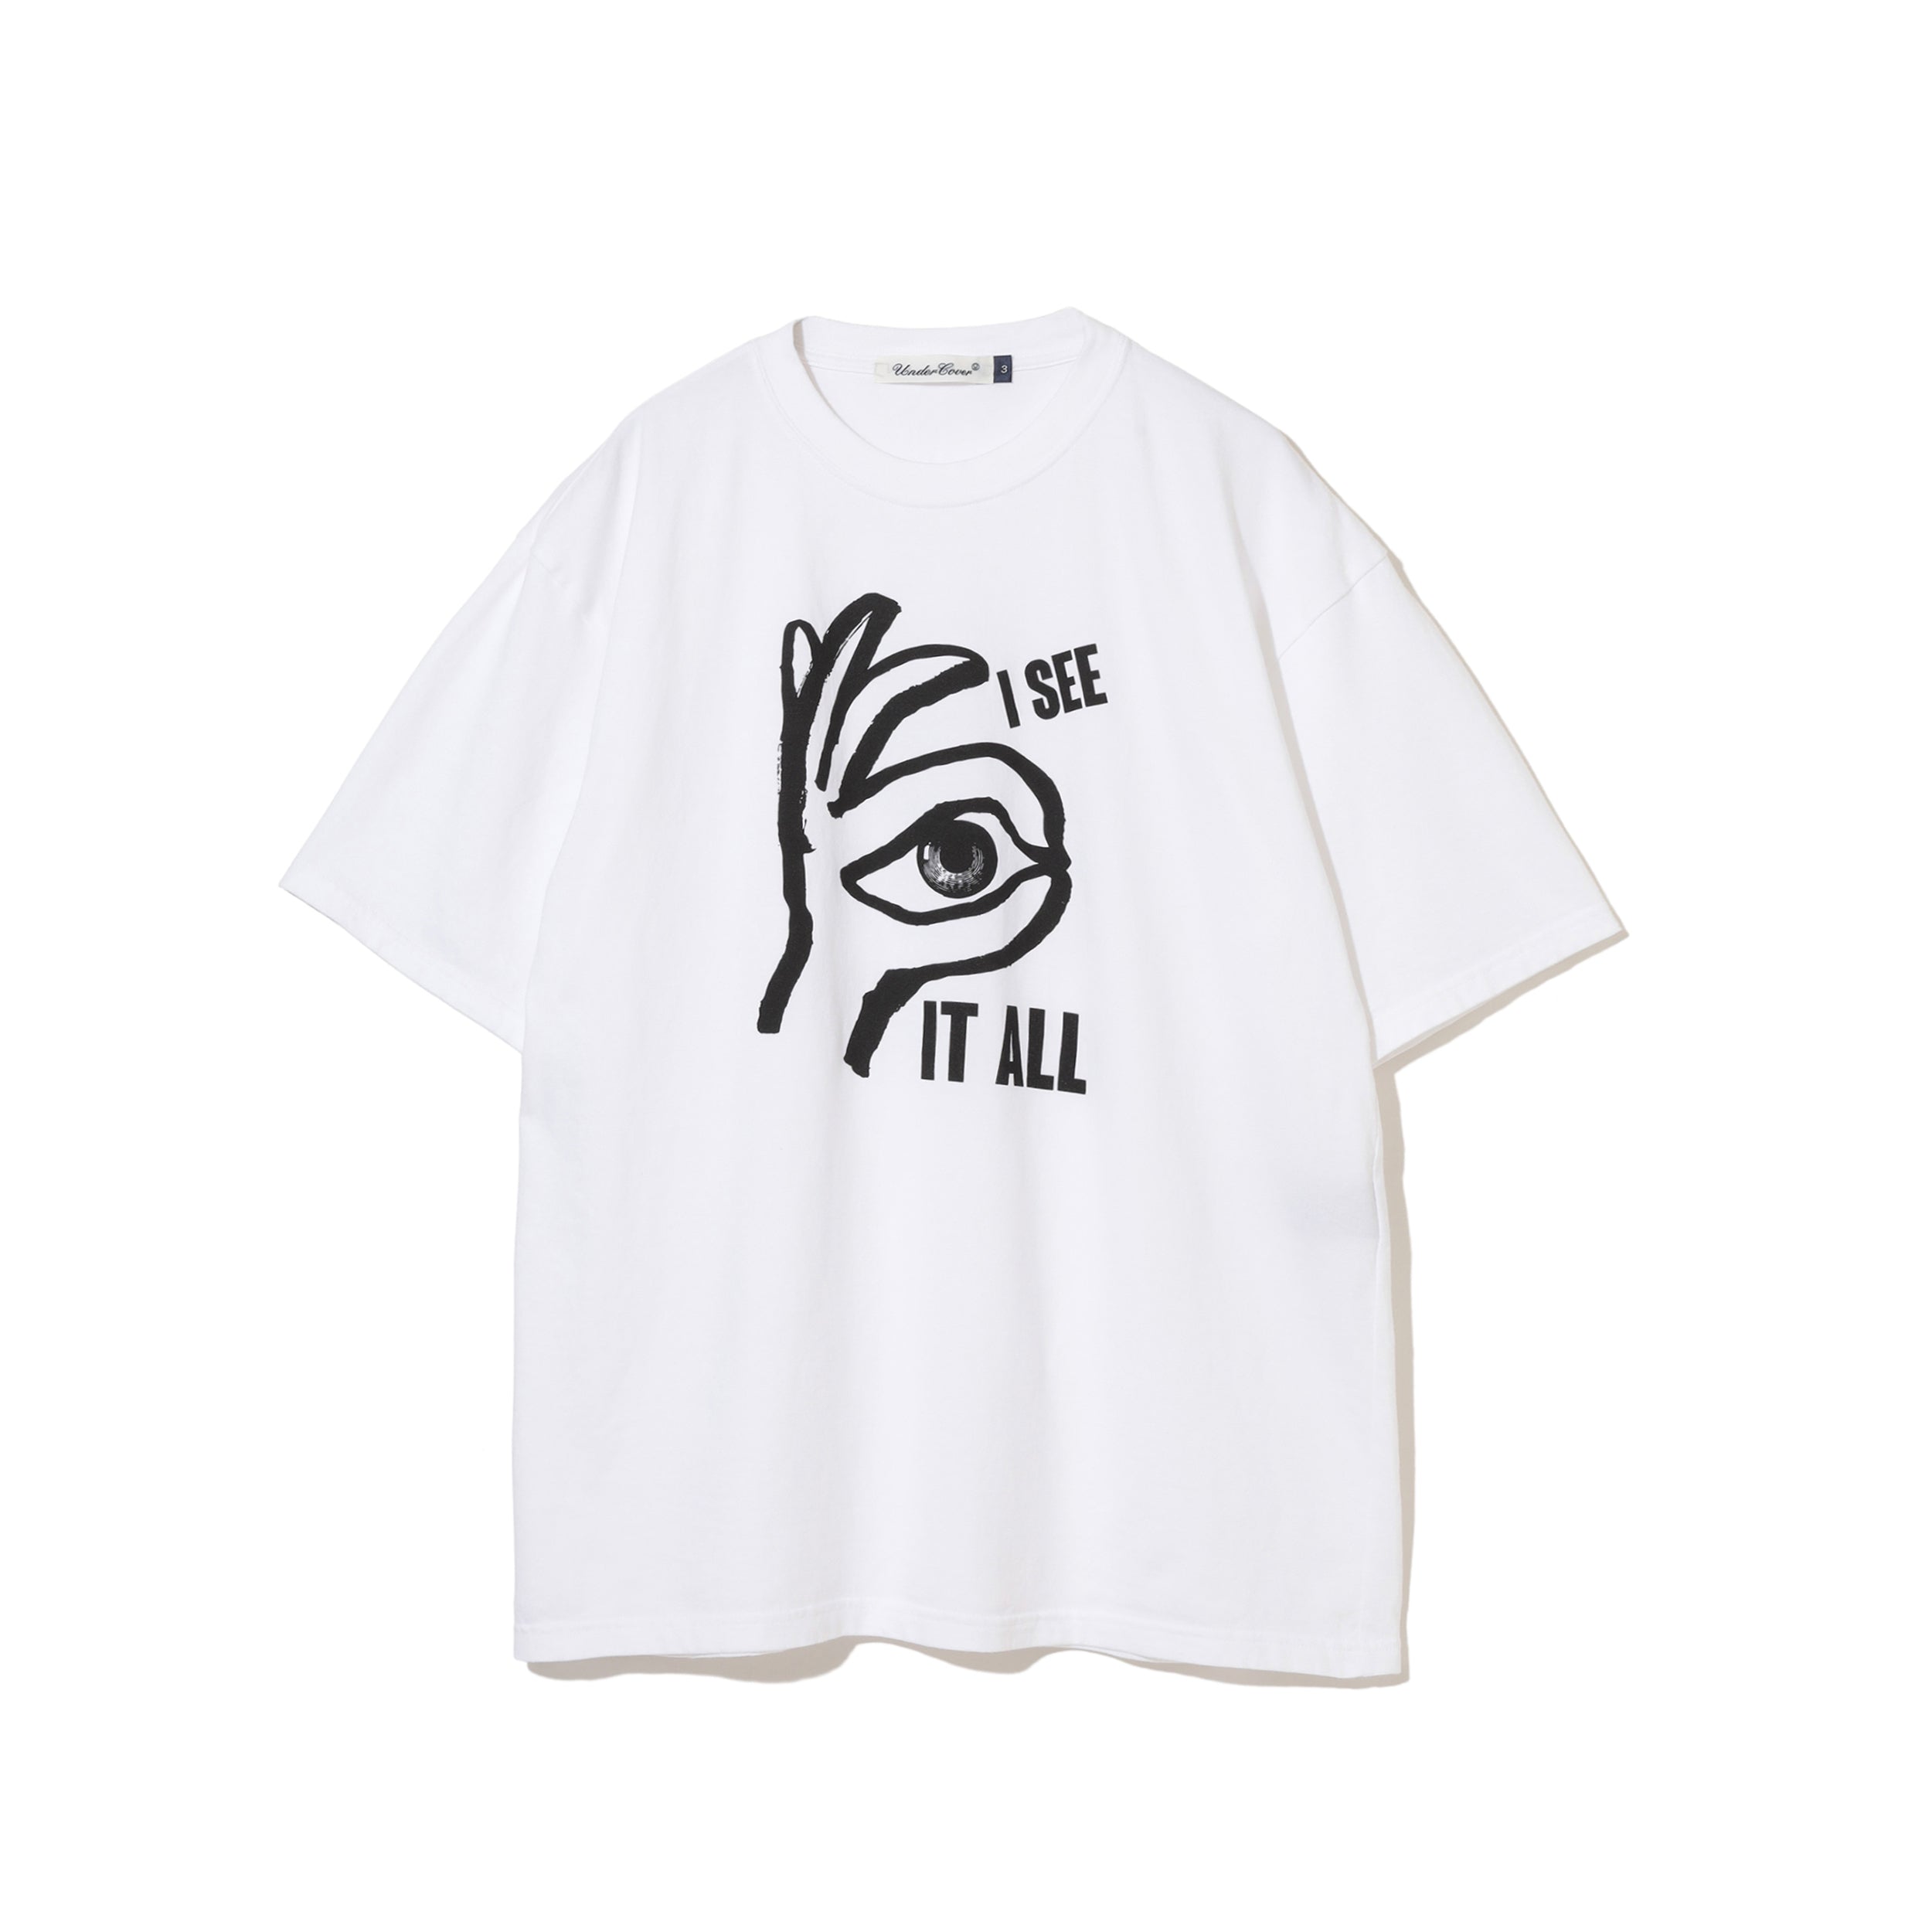 UNDERCOVER - Tee I See It All - (White)